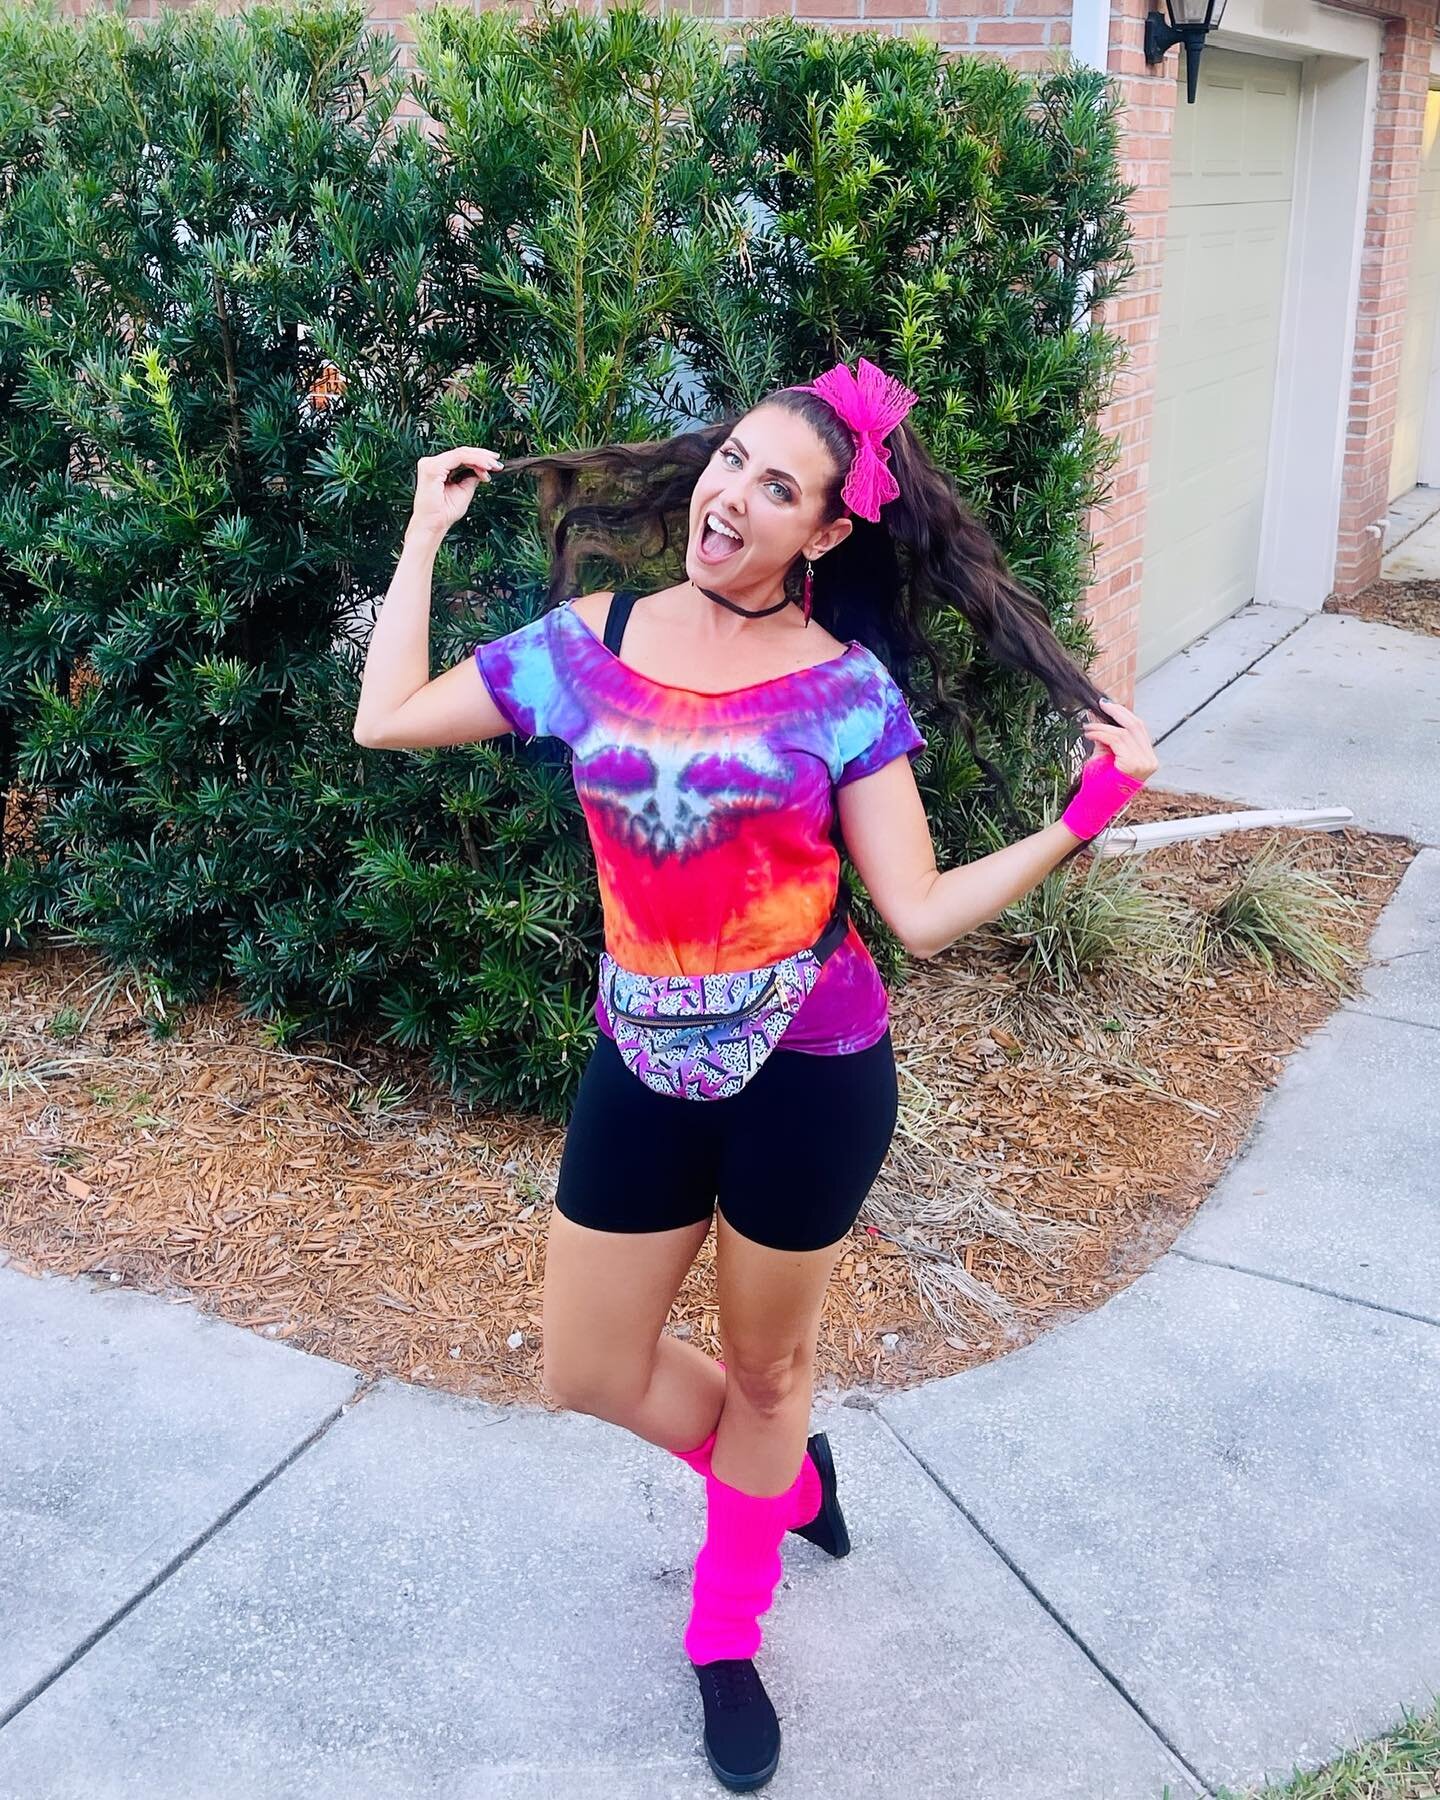 Tie dye 🤝 Fanny packs

Hope everyone has the BEST Halloween! 🎃👻

#atiedyeparty #bringbackthefannypack #80sfashion